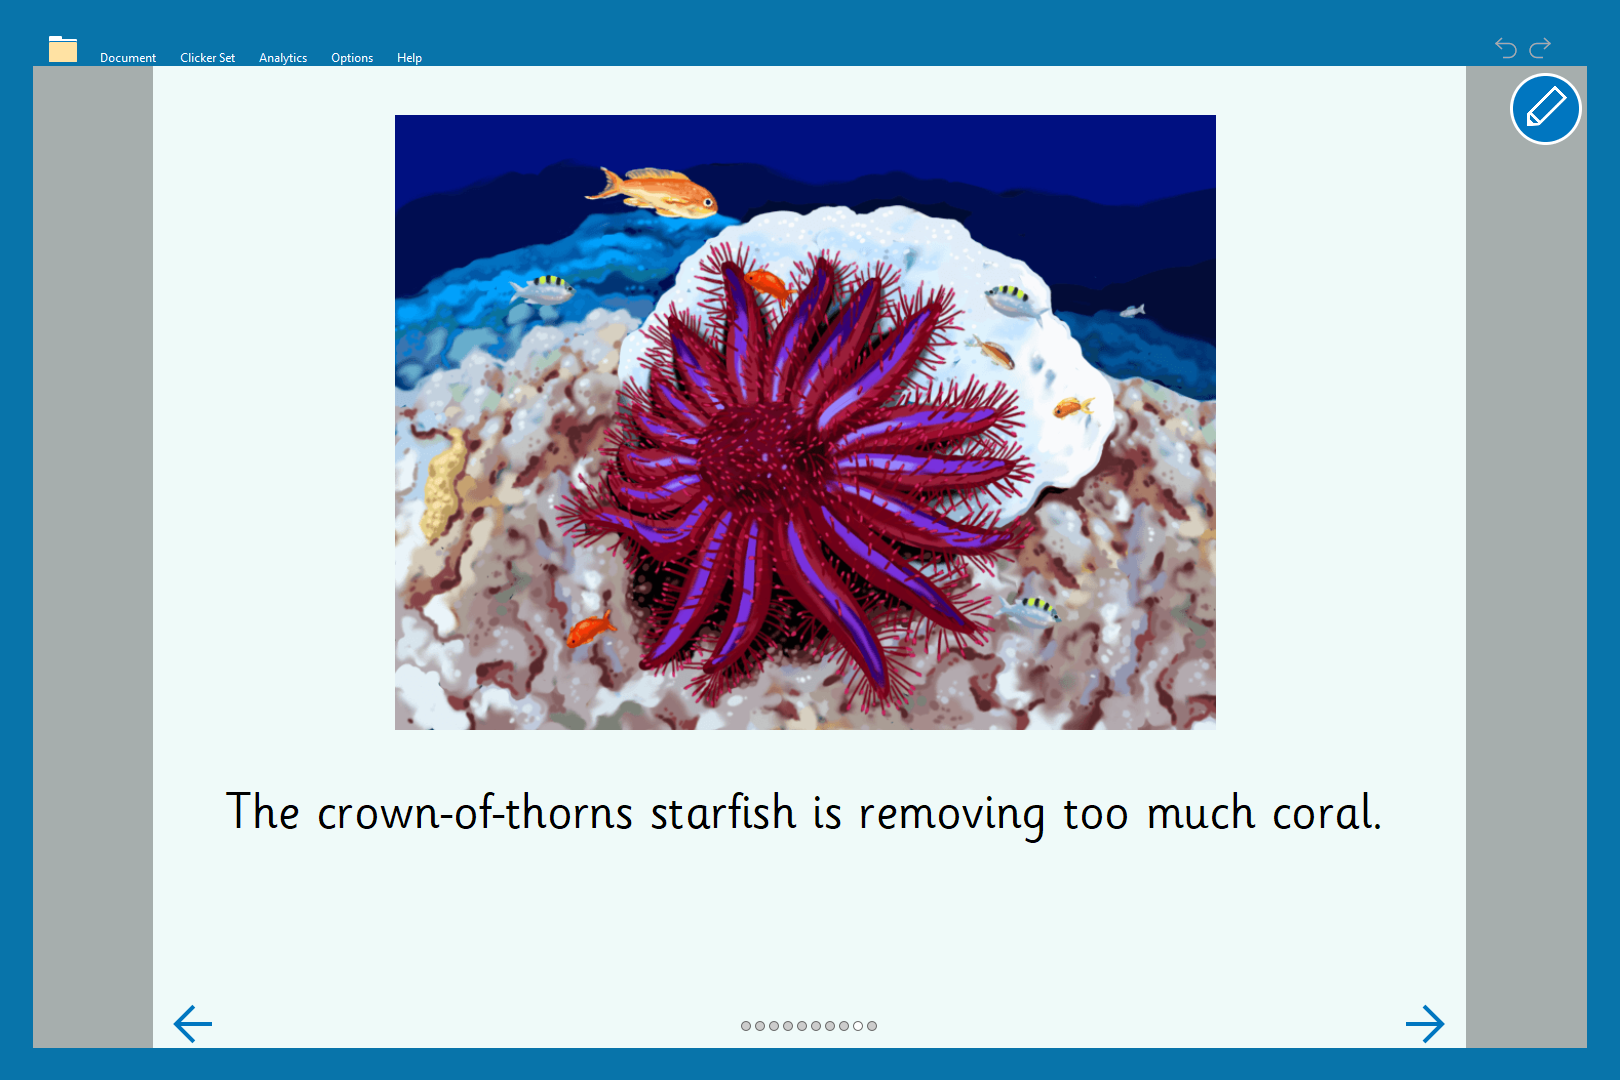 Discover the Great Barrier Reef through Clicker-2